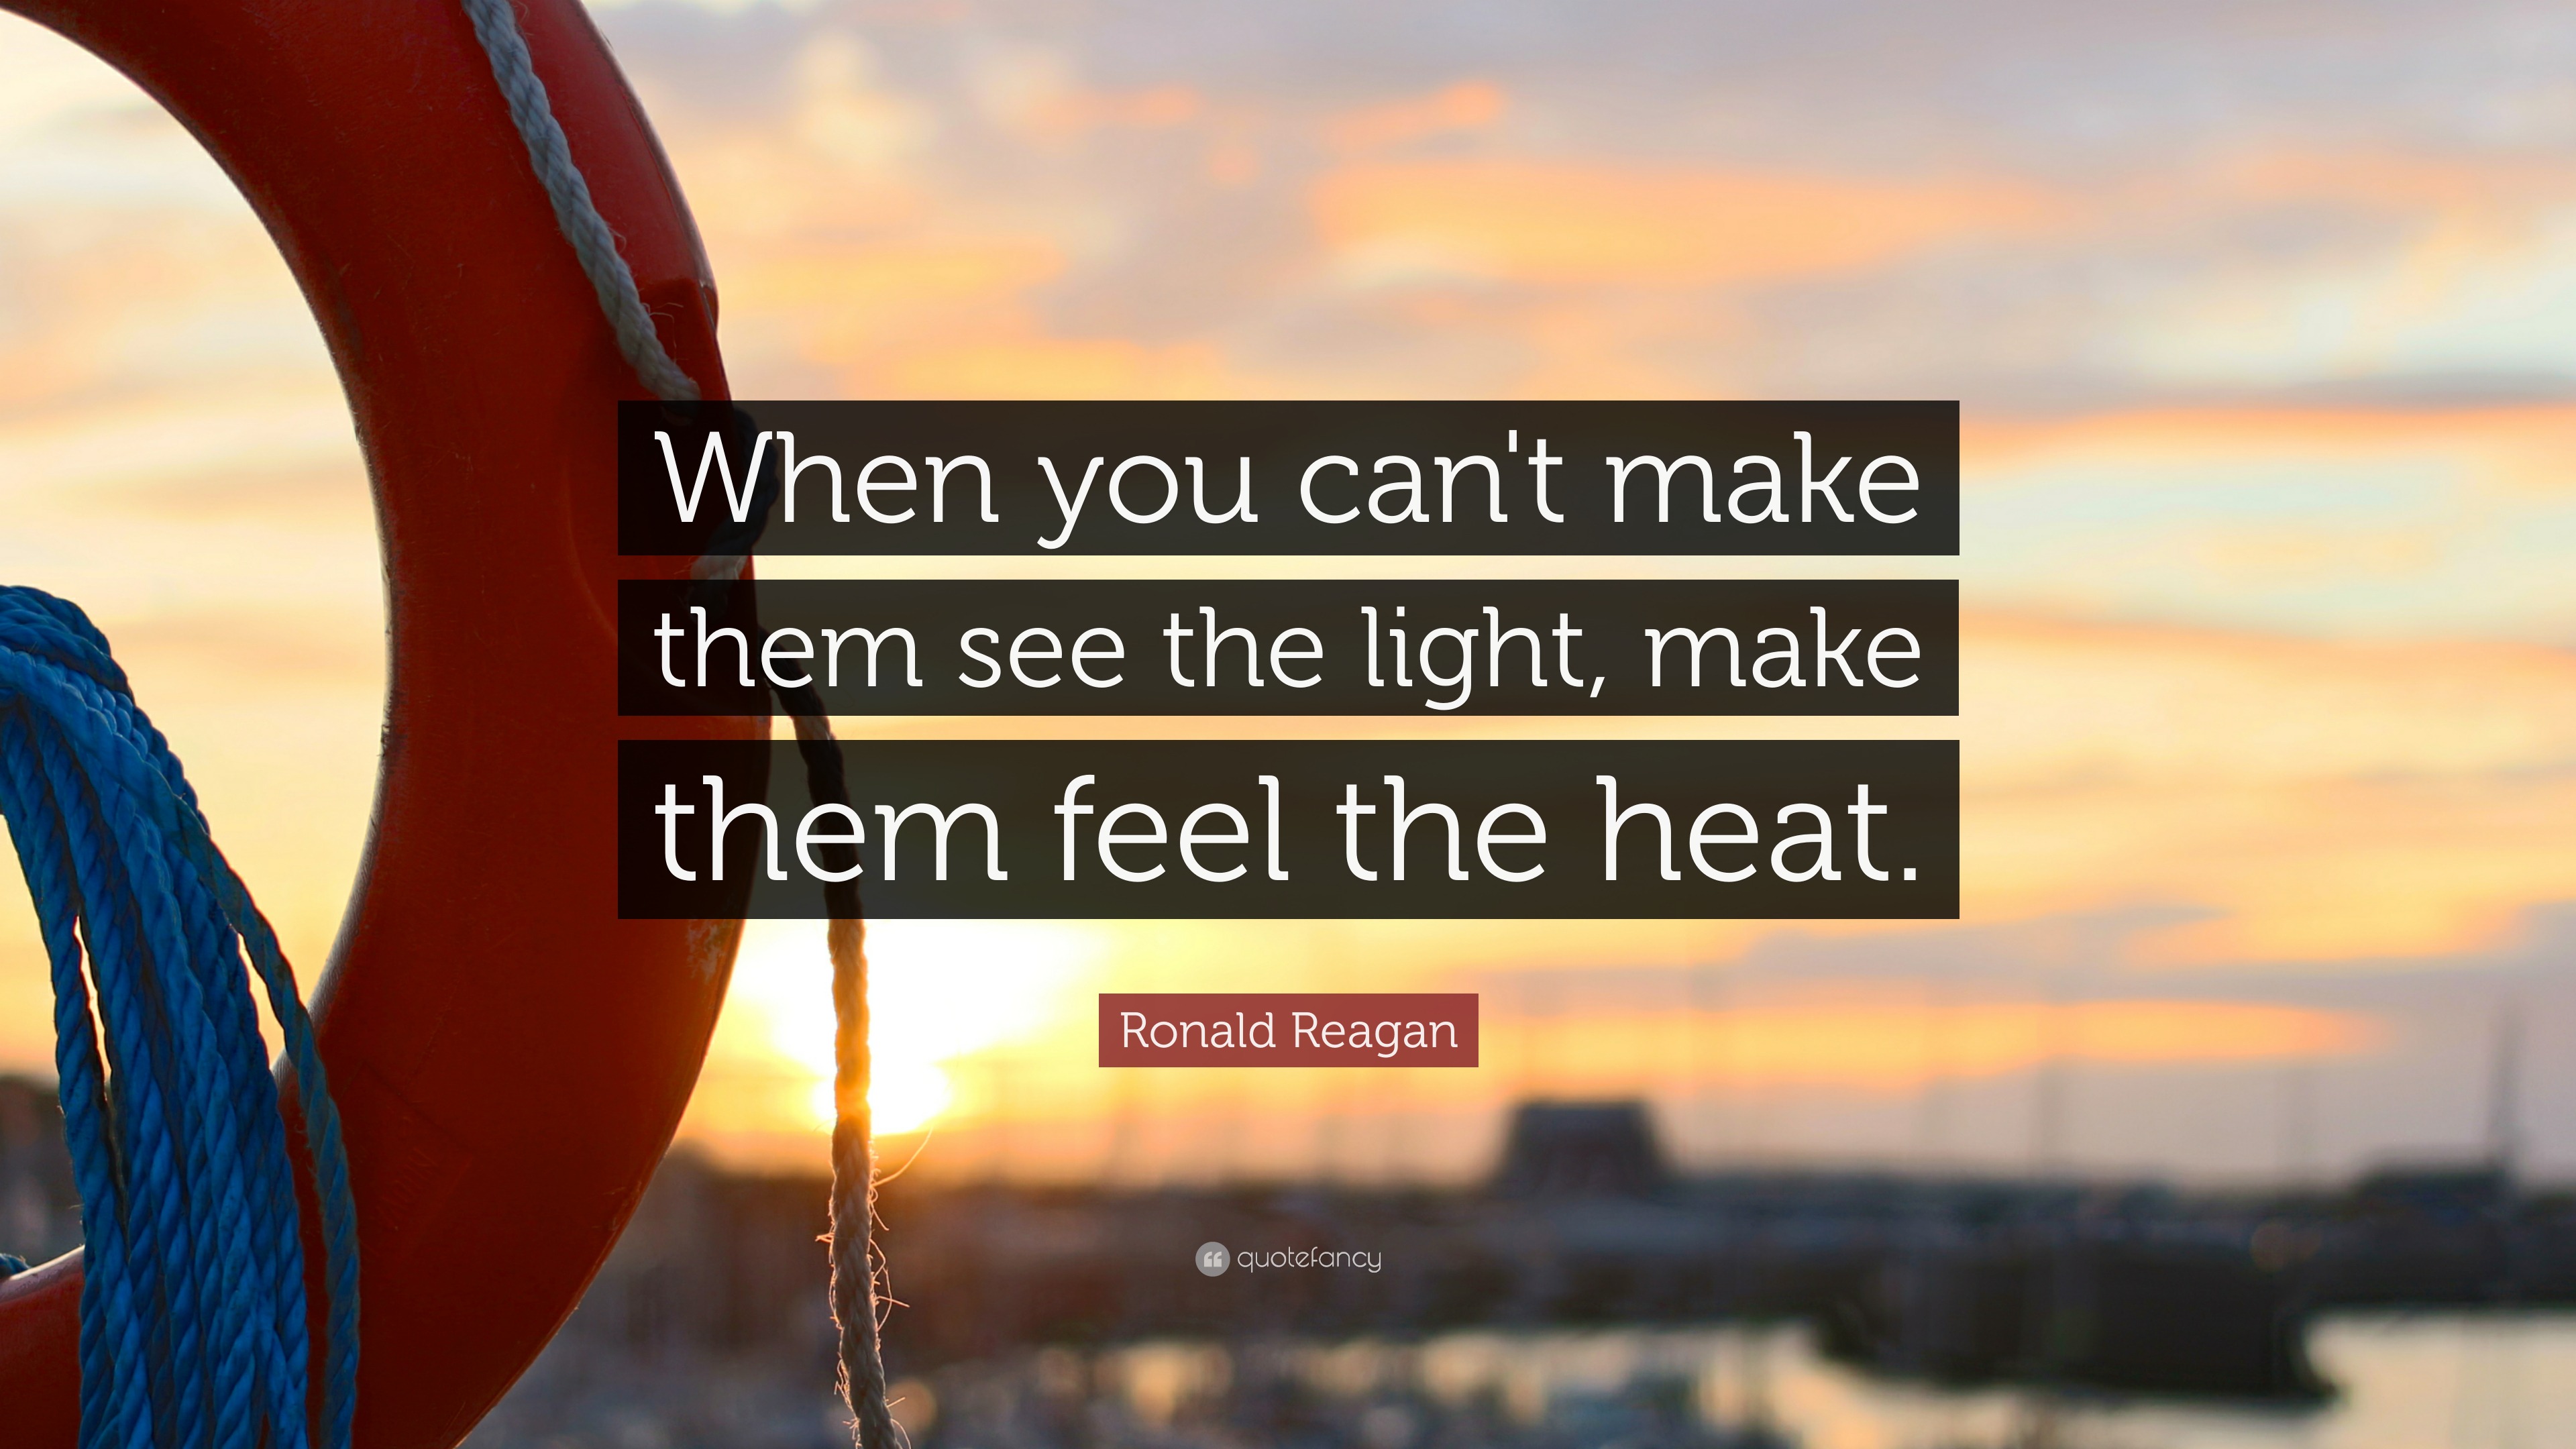 Ronald Reagan Quote: “When you can't make them see the light, make them